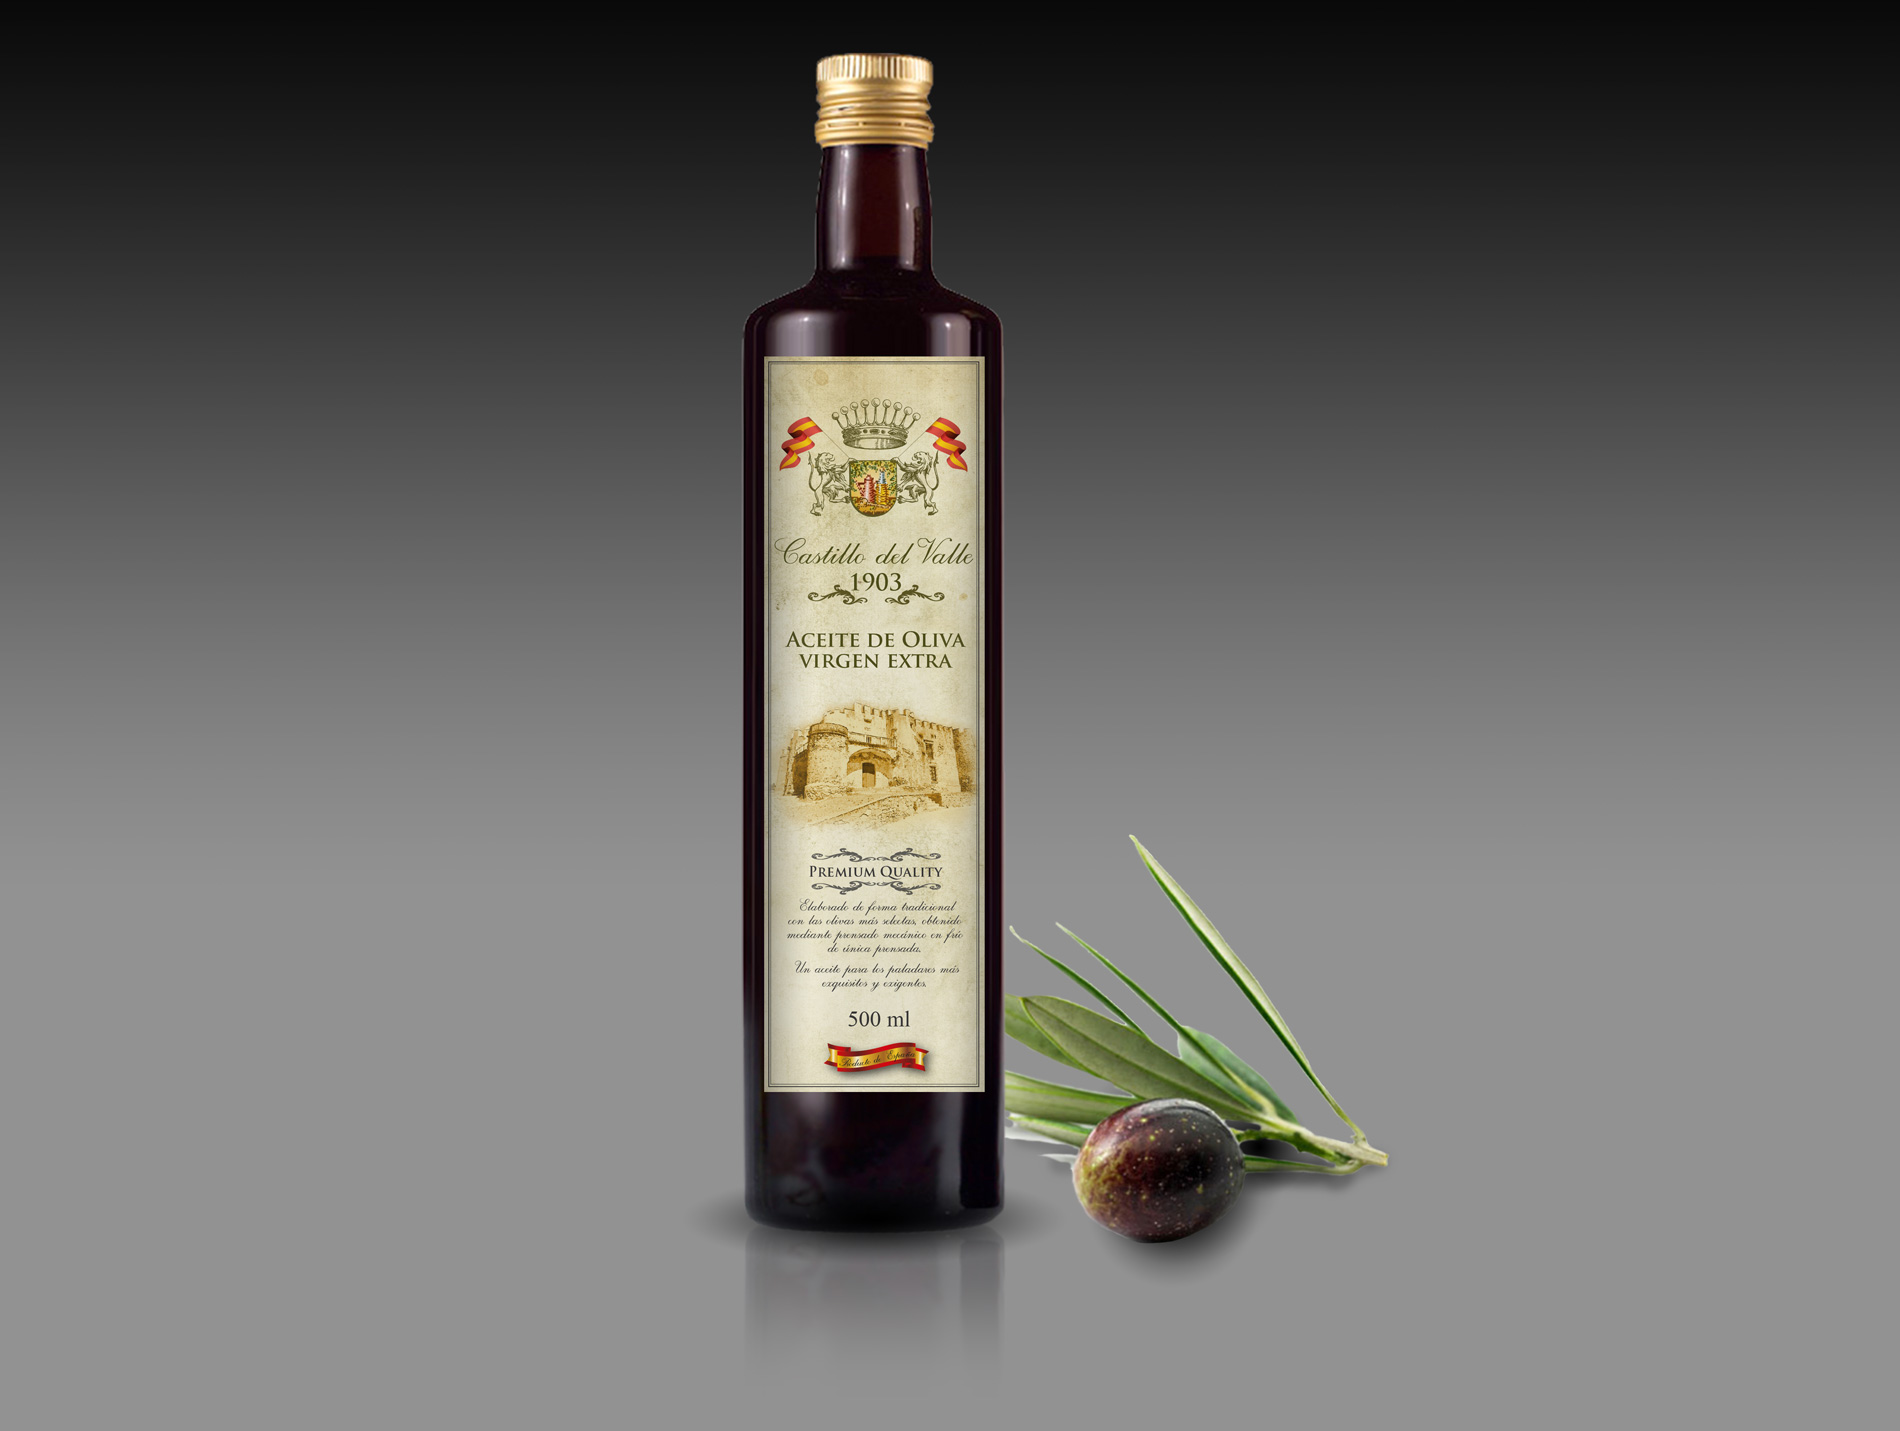 Portfolio of graphic and creative design works of extra virgin olive oil label design and packaging for CASTILLO DEL VALLE